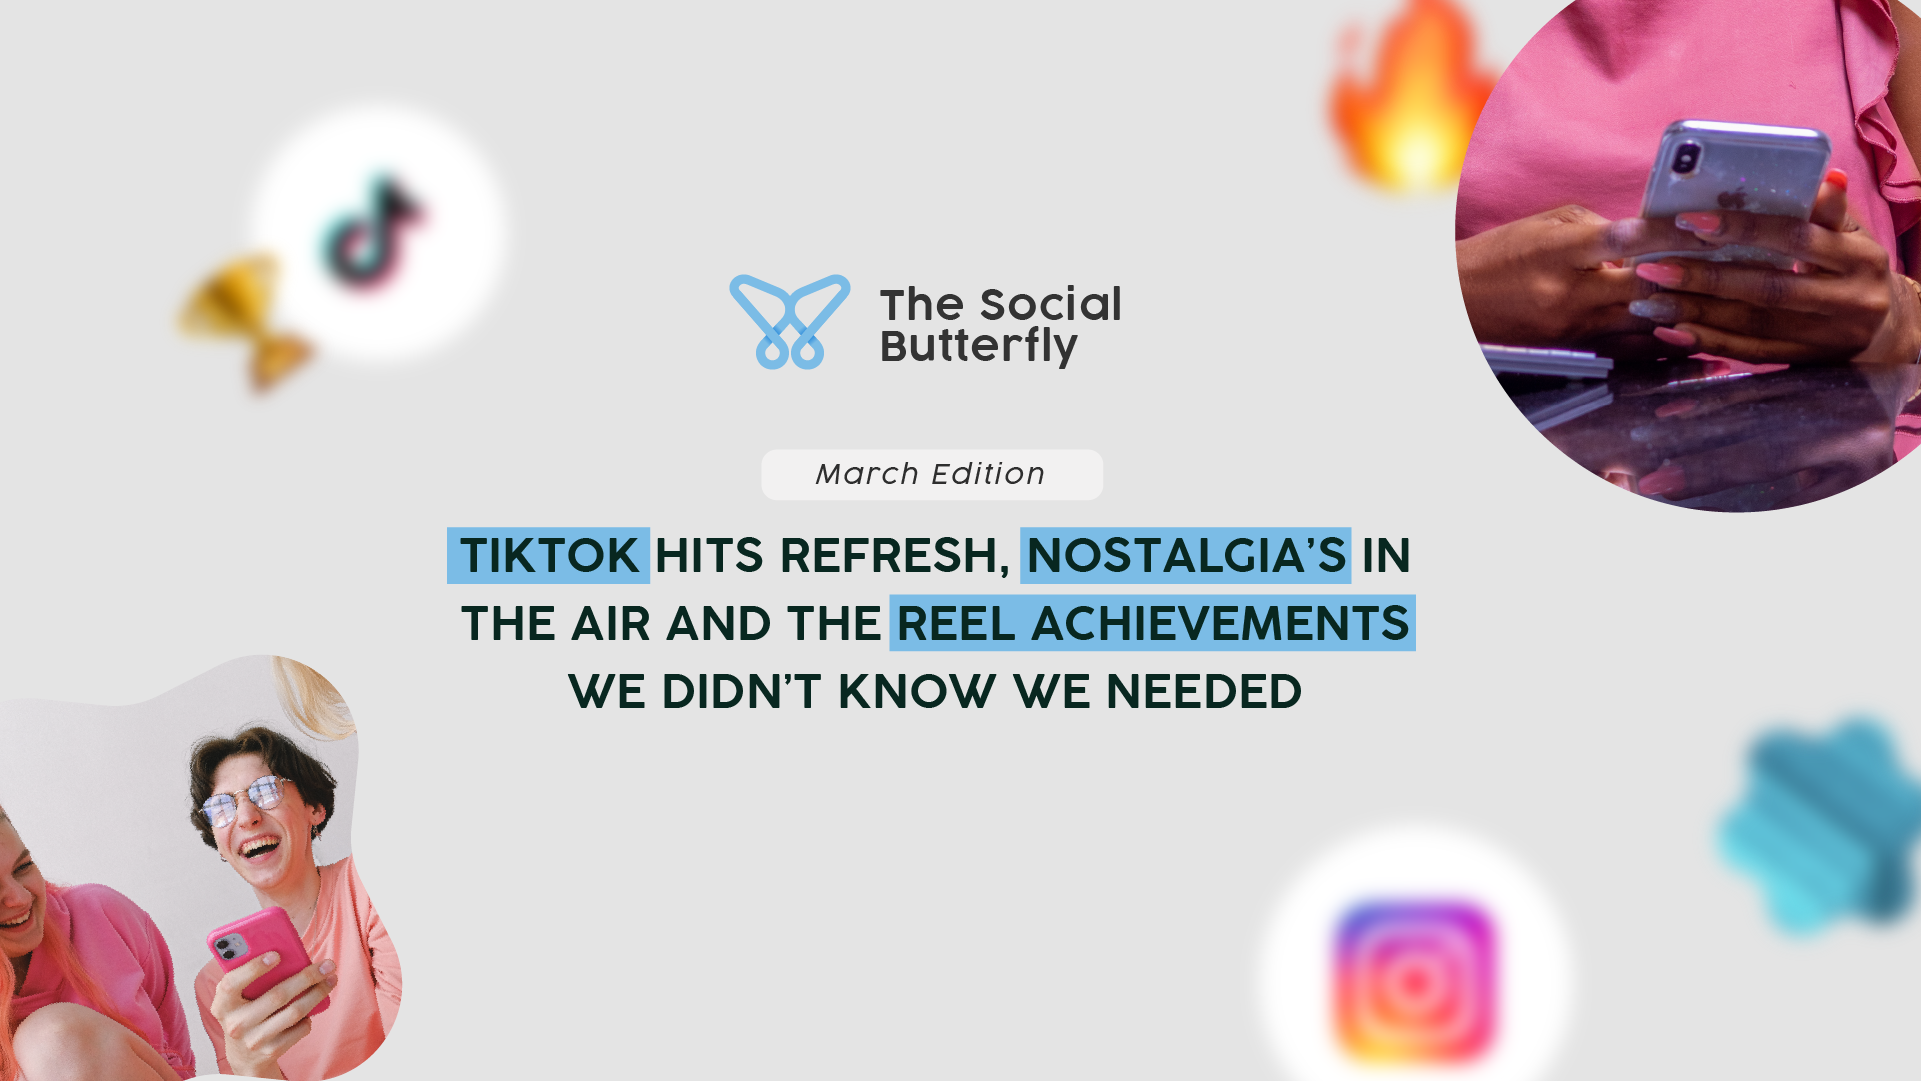 Social butterfly march header image